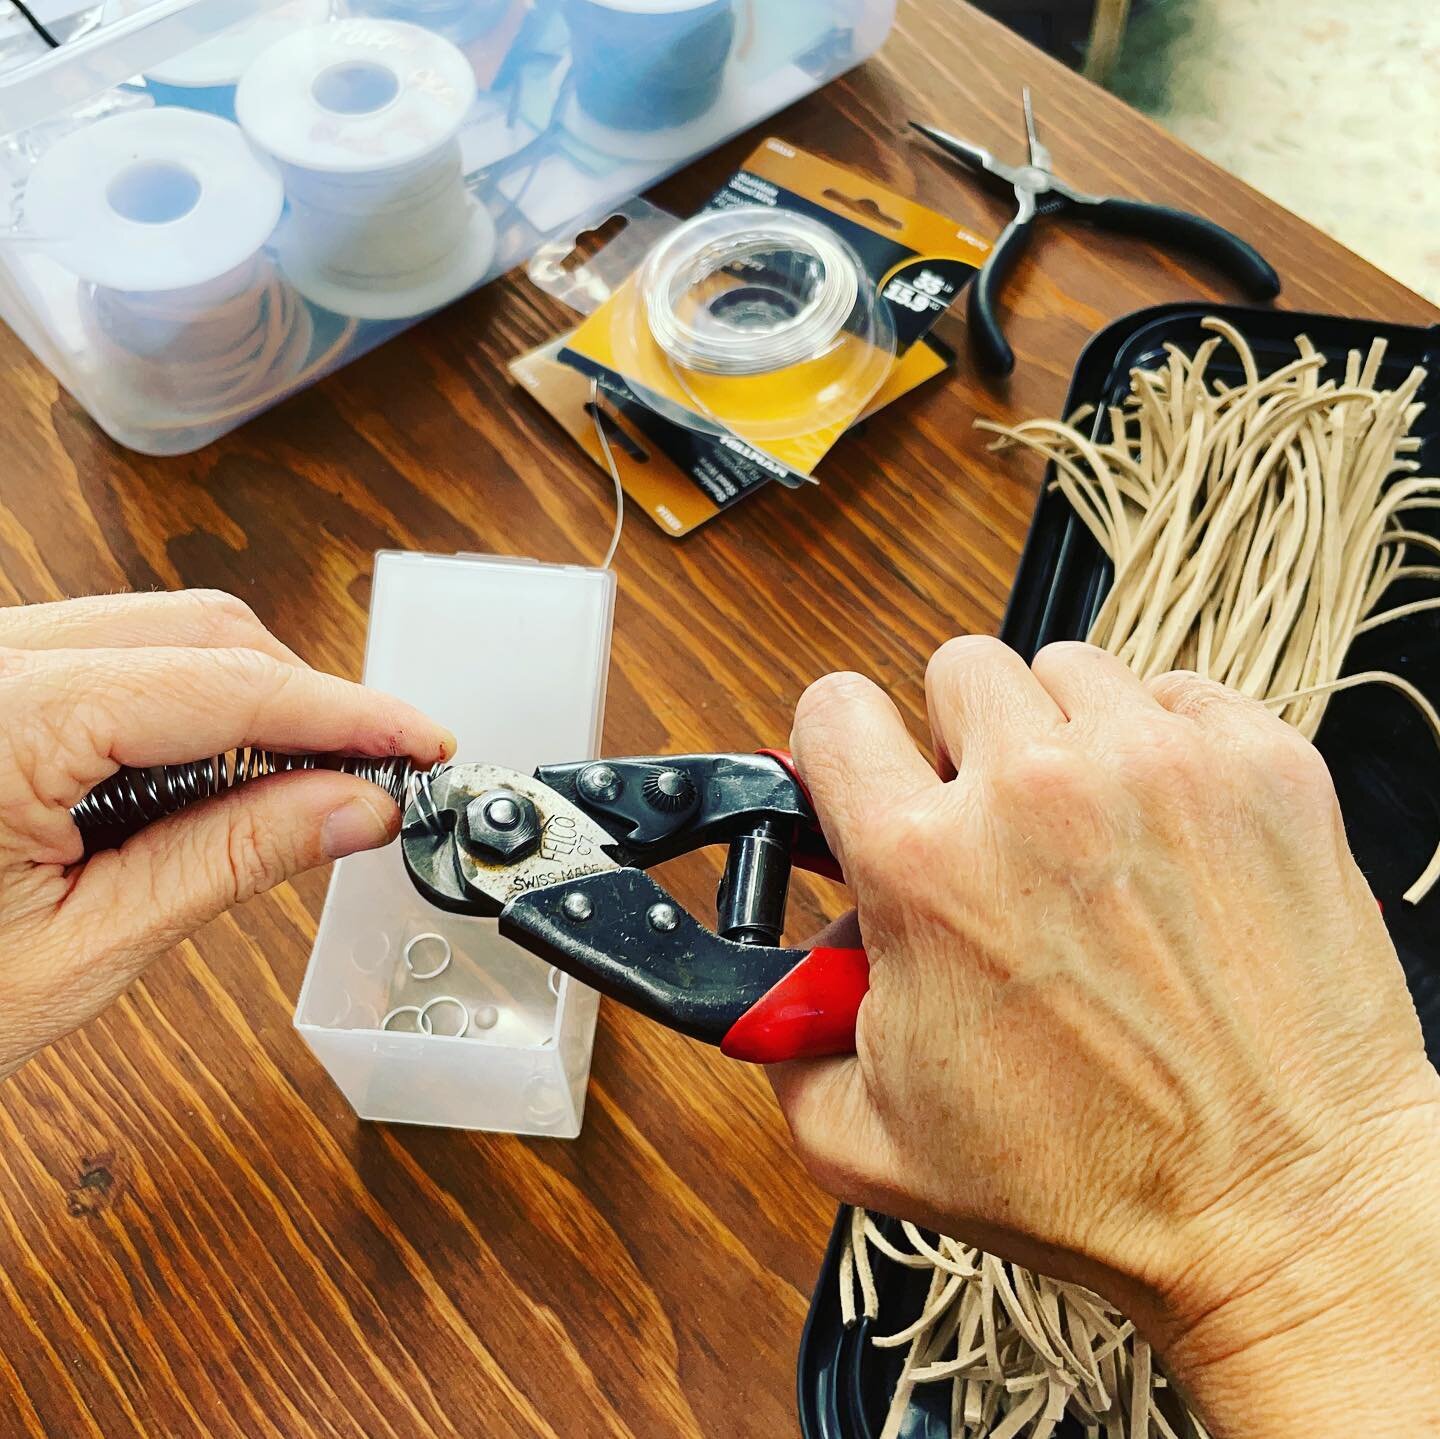 Making handmade things happens in parts- not all of them are scintillating.
&bull;&bull;&bull;
#handmade #handcrafted 
#madebyhand